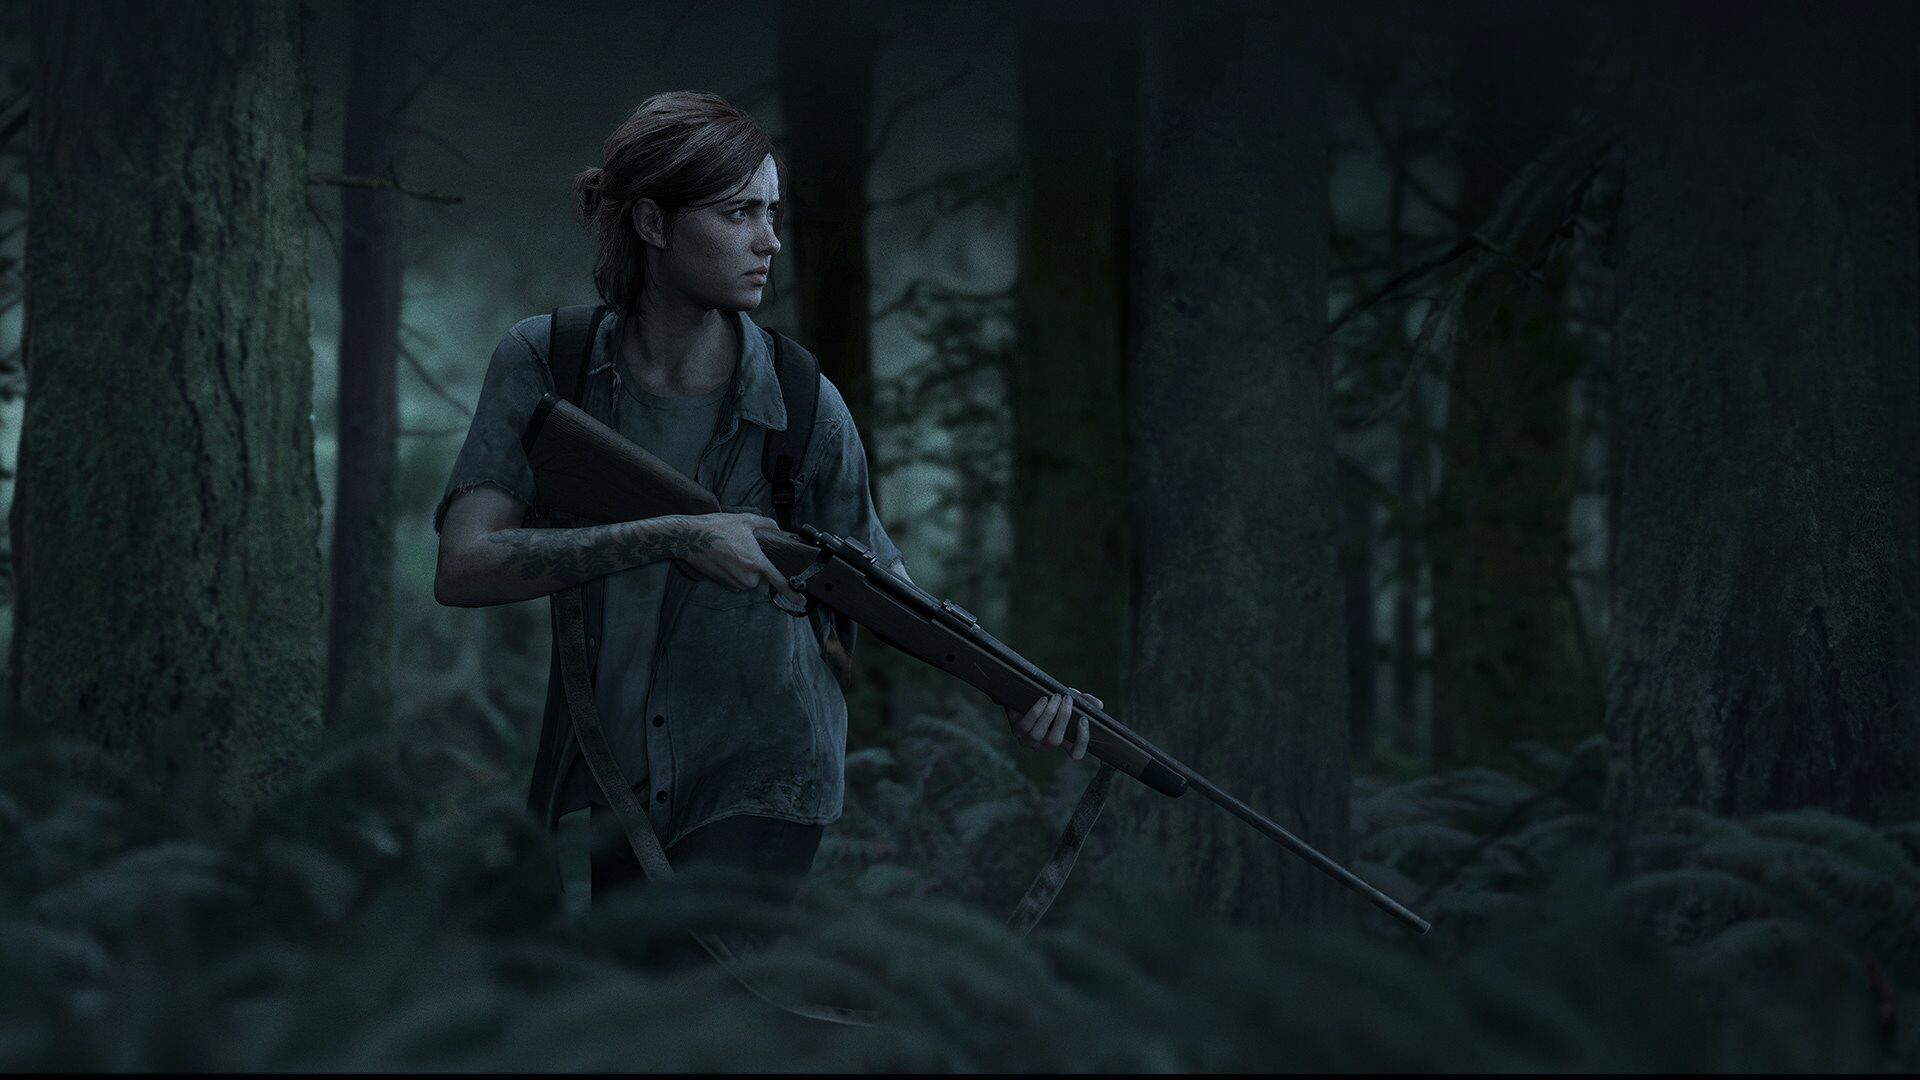 The Last of Us: It was nominated for 13 awards at the 17th British Academy Games Awards, the most in the show's history, winning for Animation, the publicly-voted EE Game of the Year, and Performer in a Leading Role for Bailey, Part 2. 1920x1080 Full HD Background.